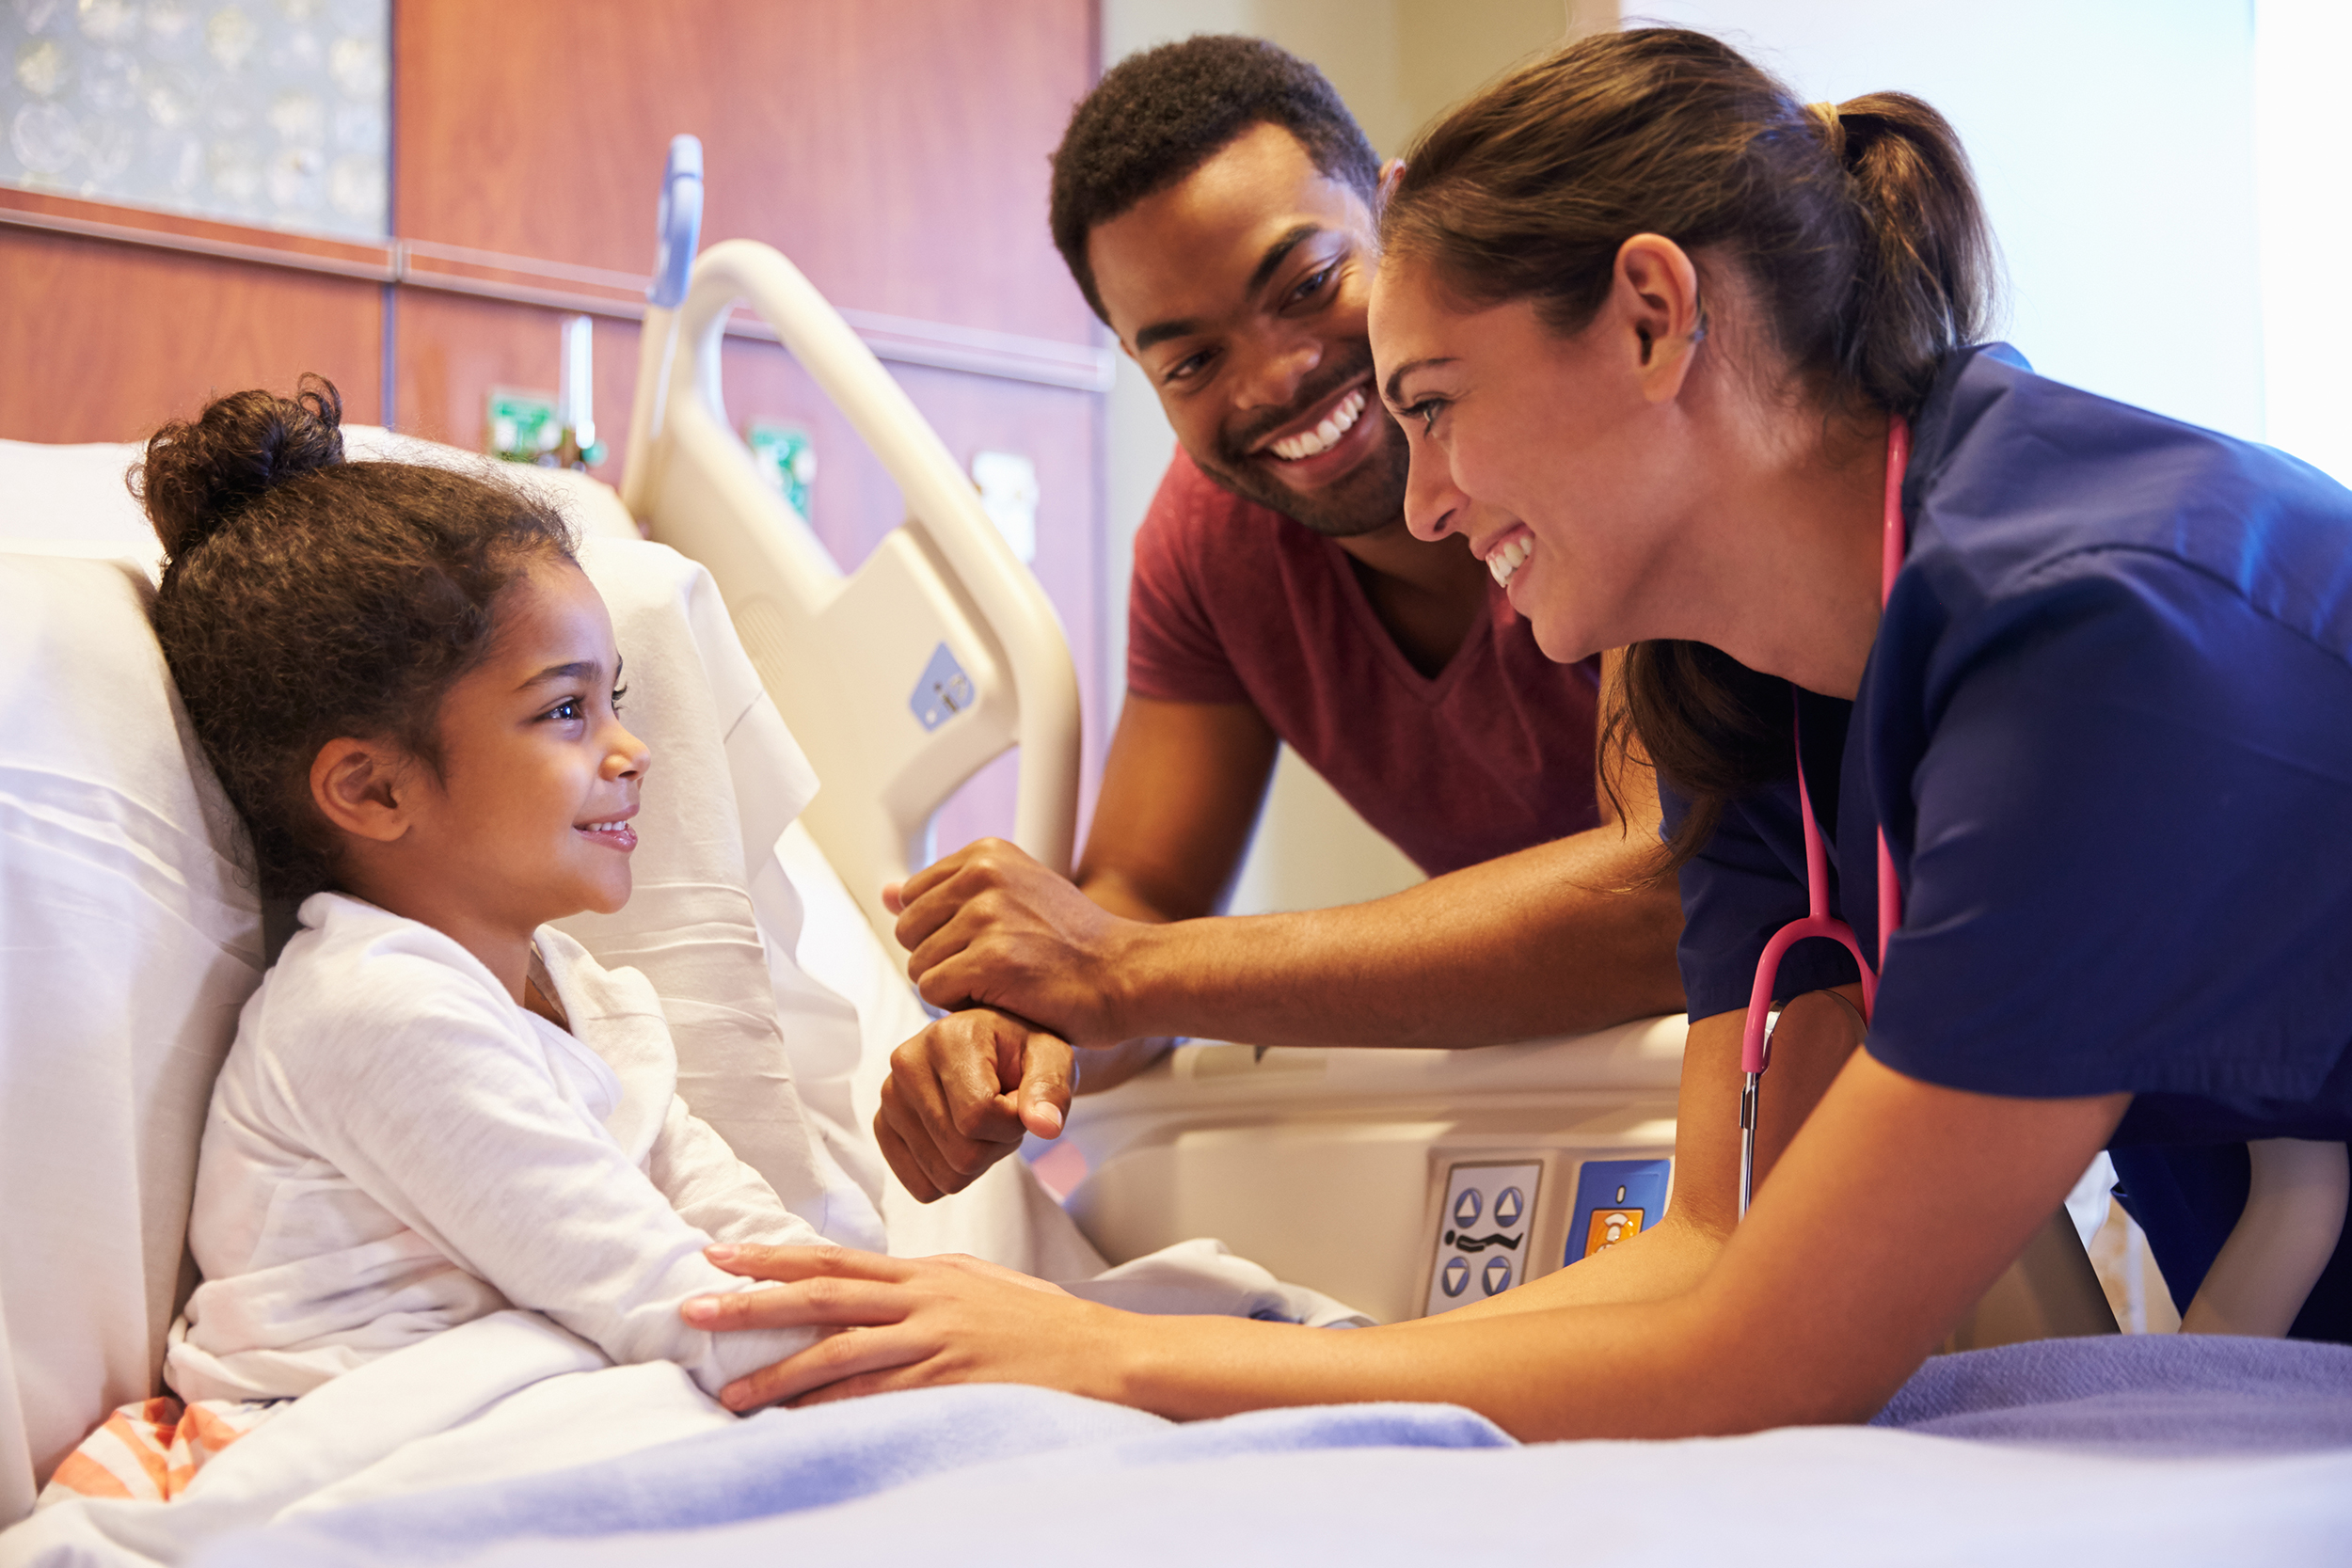 A nurse and a parent talk with a smiling child in a hospital bed in this image, which represents the pediatric surgery process at our Troy, Michigan center.